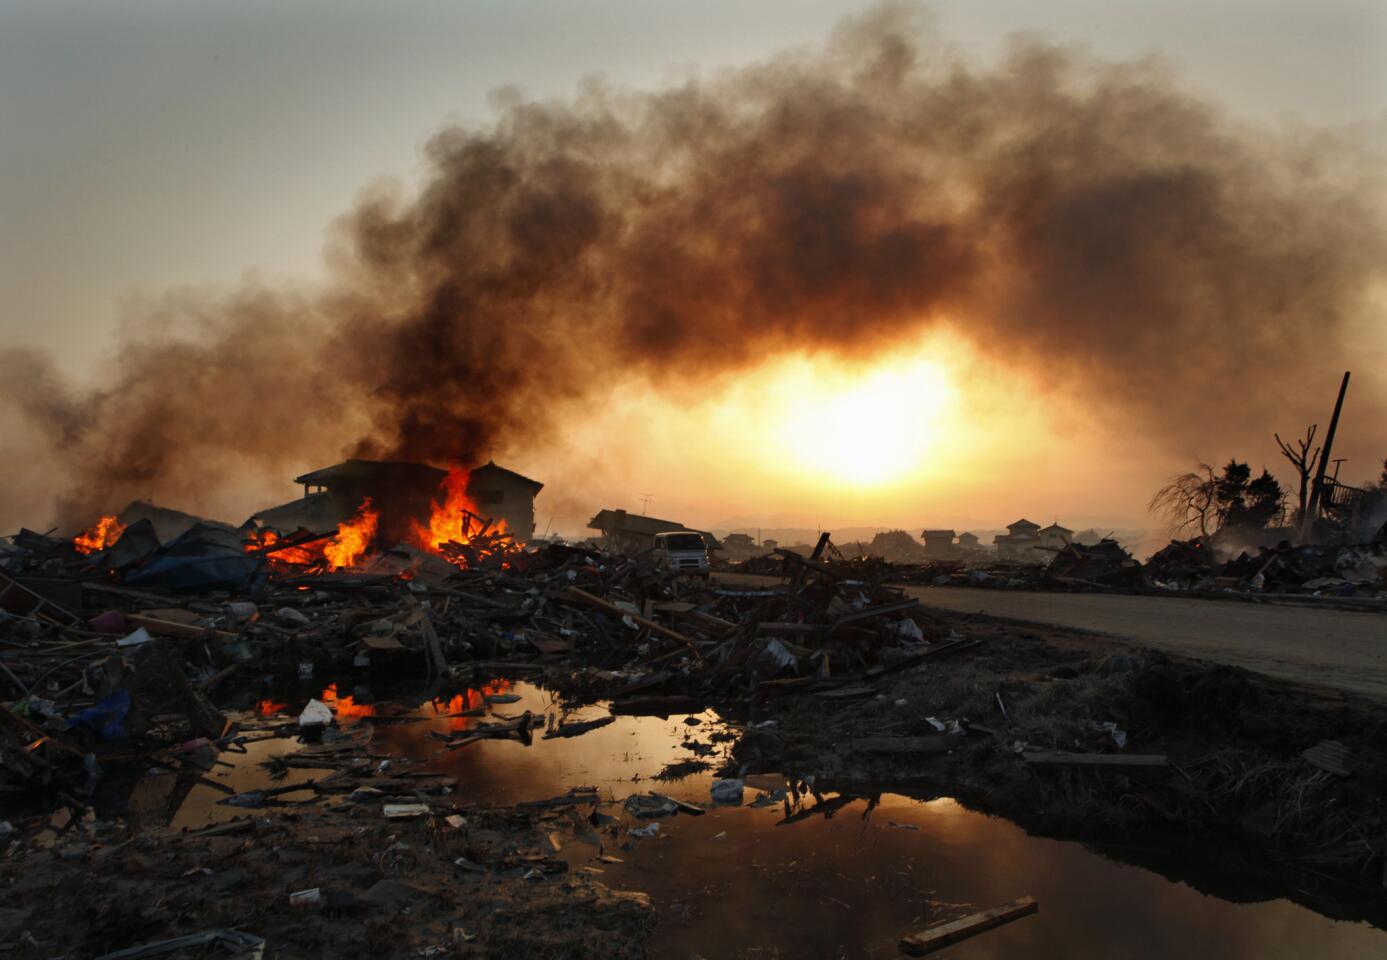 The Natori area of Sendai, Japan, was completely destroyed by the March 2011 tsunami that followed a powerful offshore earthquake. Fires burned in the neighborhood as civil servants finally were able to enter the area to look for the dead.